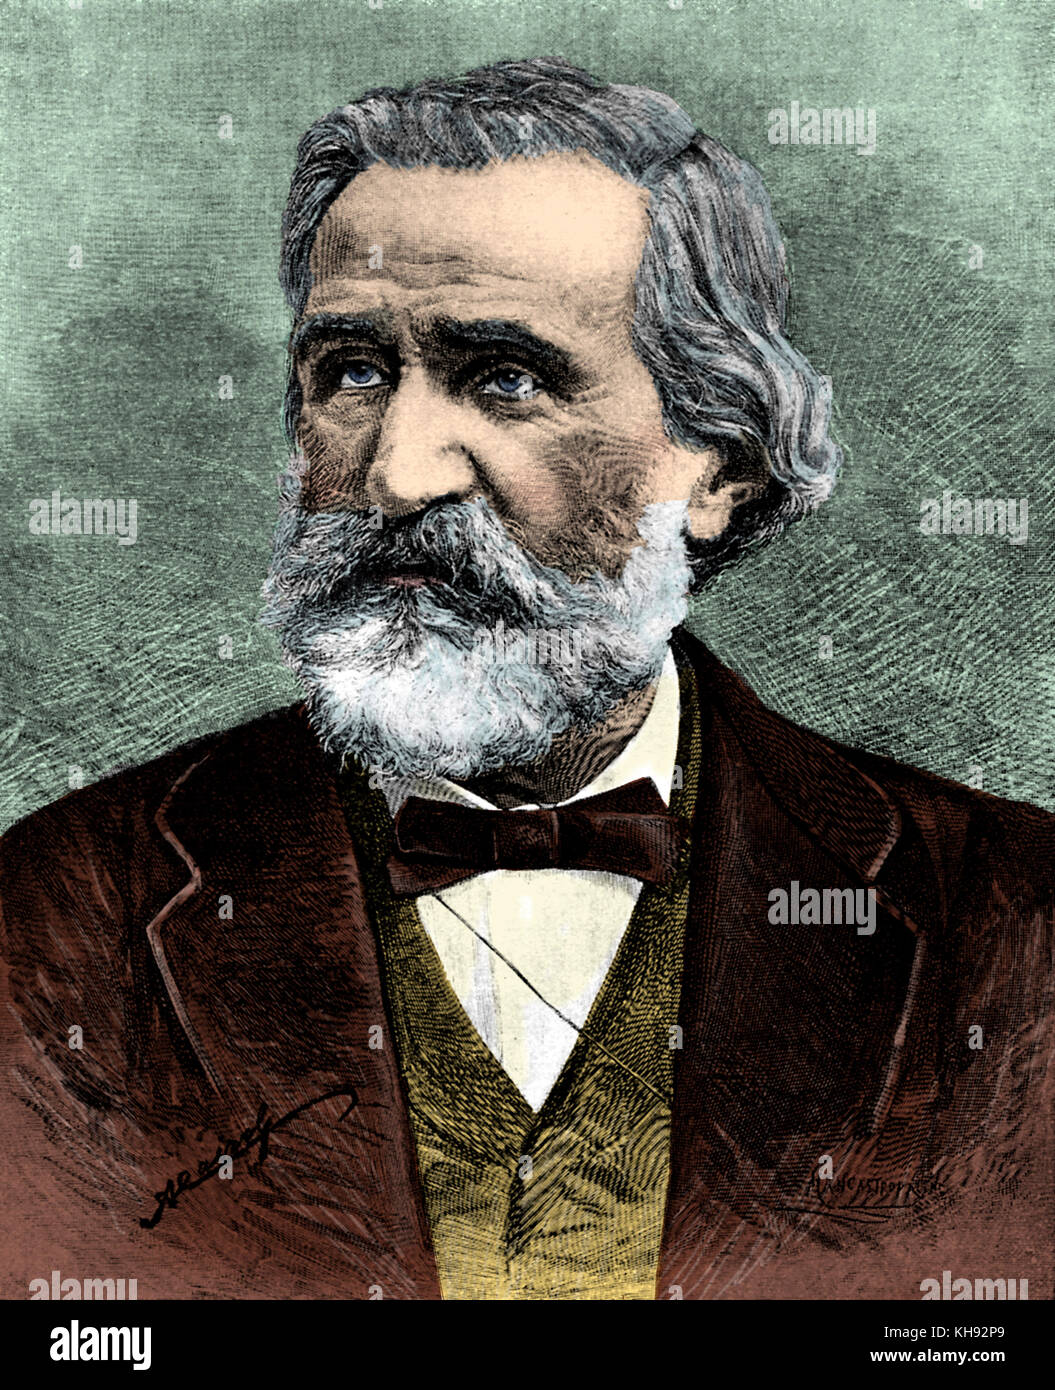 Portrait of Giuseppe Verdi  - Italian composer,  9 or 10 October 1813 - 27 January 1901. Drawing by A Cairoli after an engraving by Mancastropa. Stock Photo